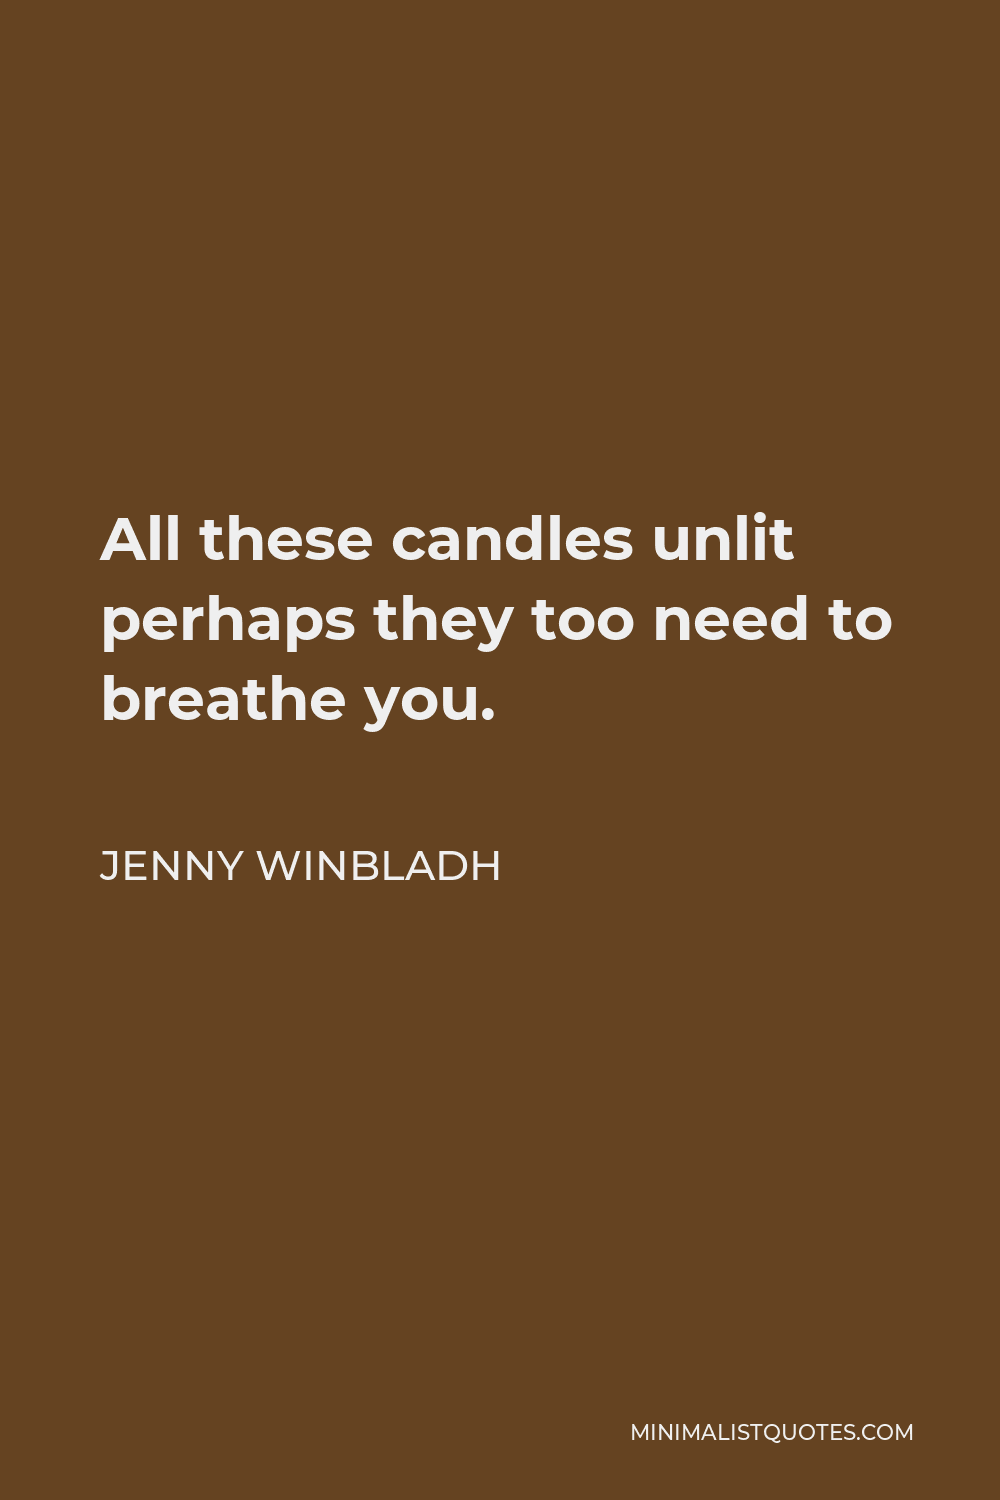 Jenny Winbladh Quote - All these candles unlit perhaps they too need to breathe you.